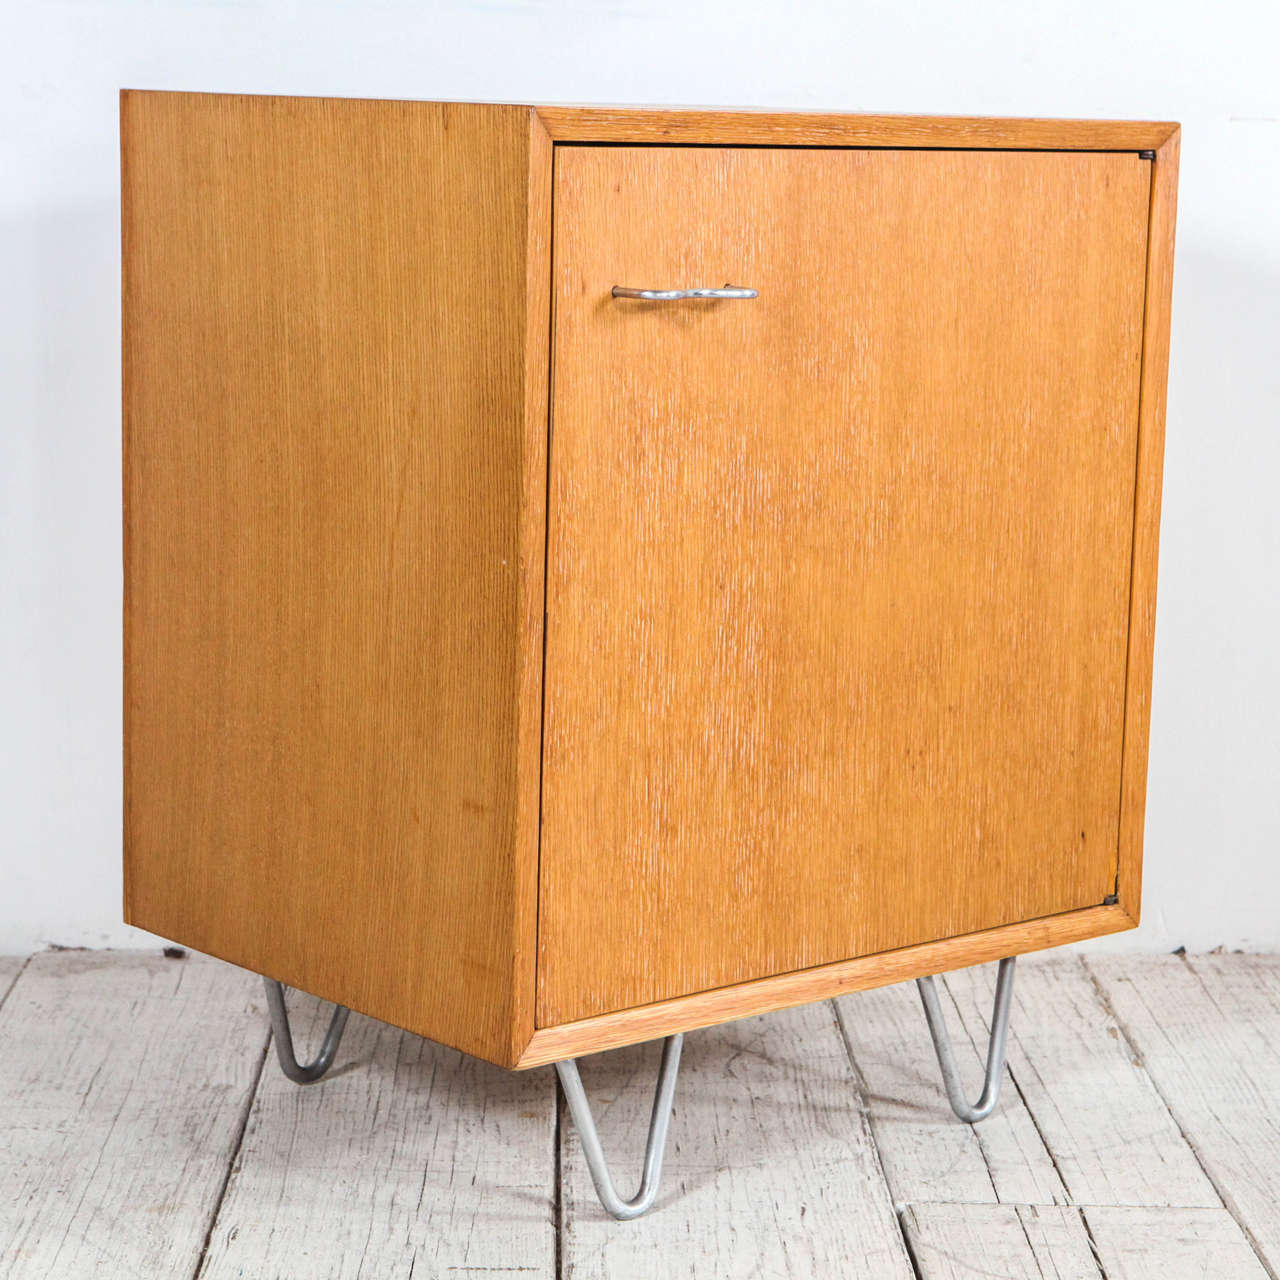 Midcentury side table / cabinet on metal hair pin legs with matching door hardware.